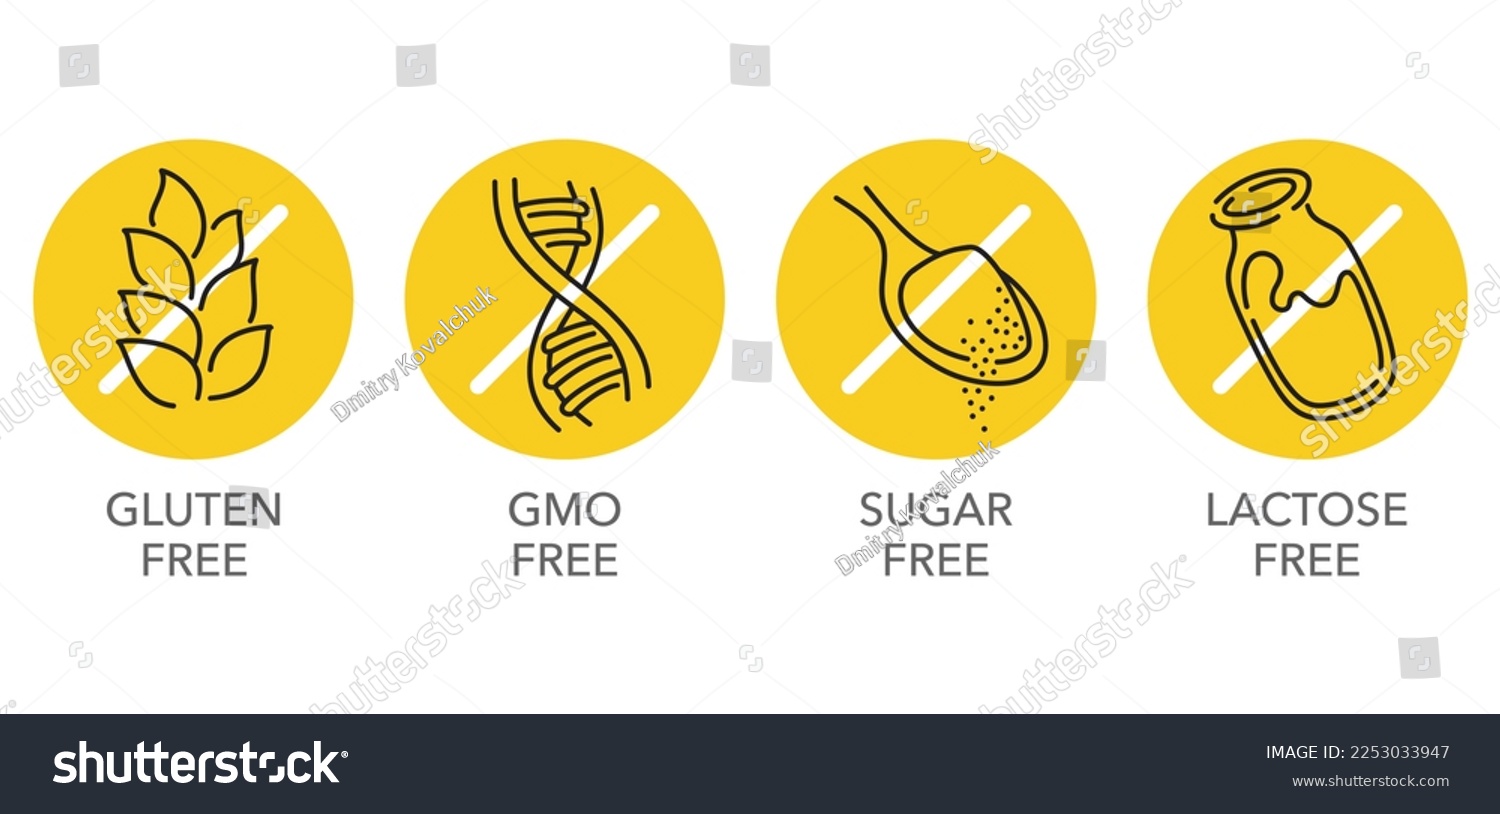 SVG of Lactose free yellow icons in thin line. Sugar free, Gluten free, GMO free - set of food packaging decoration element for healthy nutrition svg